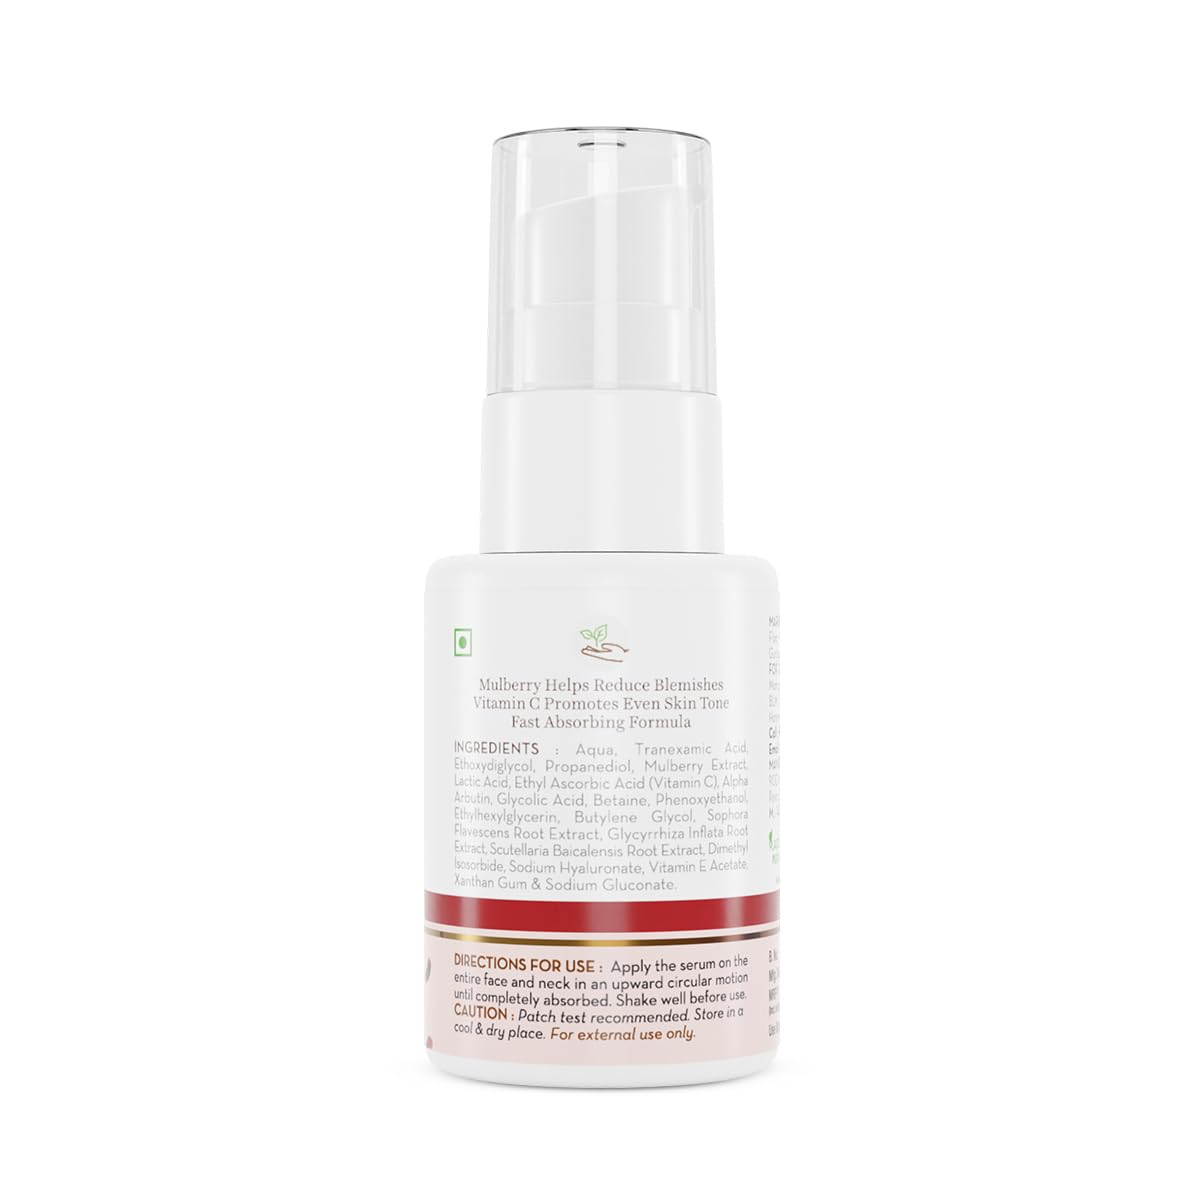 Mamaearth Bye Bye Blemishes Face Serum with Mulberry and Vitamin C for Even Skin Tone - 30ml